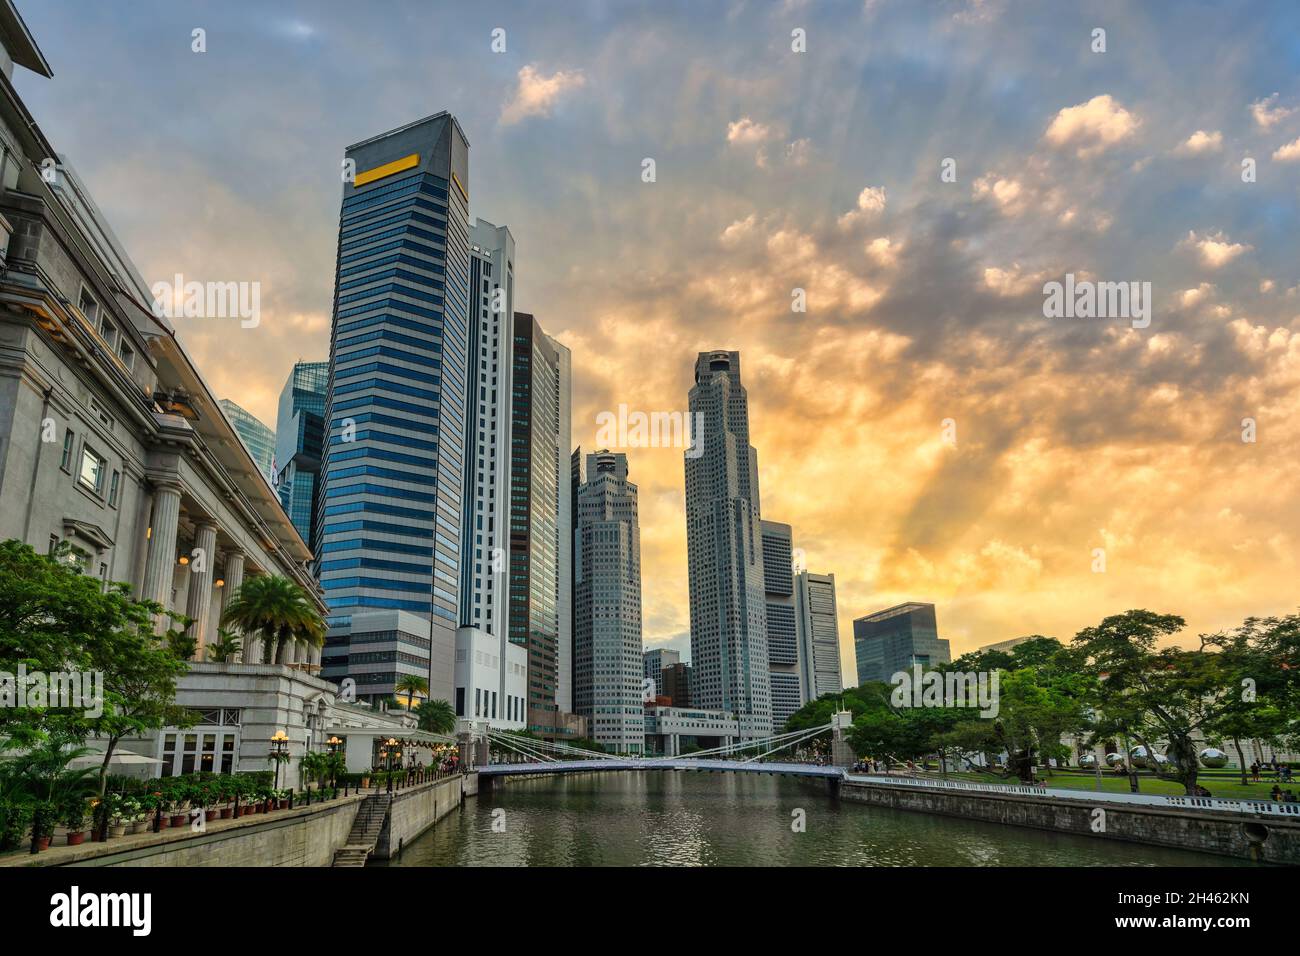 Singapore sunset city skyline at Boat Quay and Clarke Quay waterfront business district Stock Photo